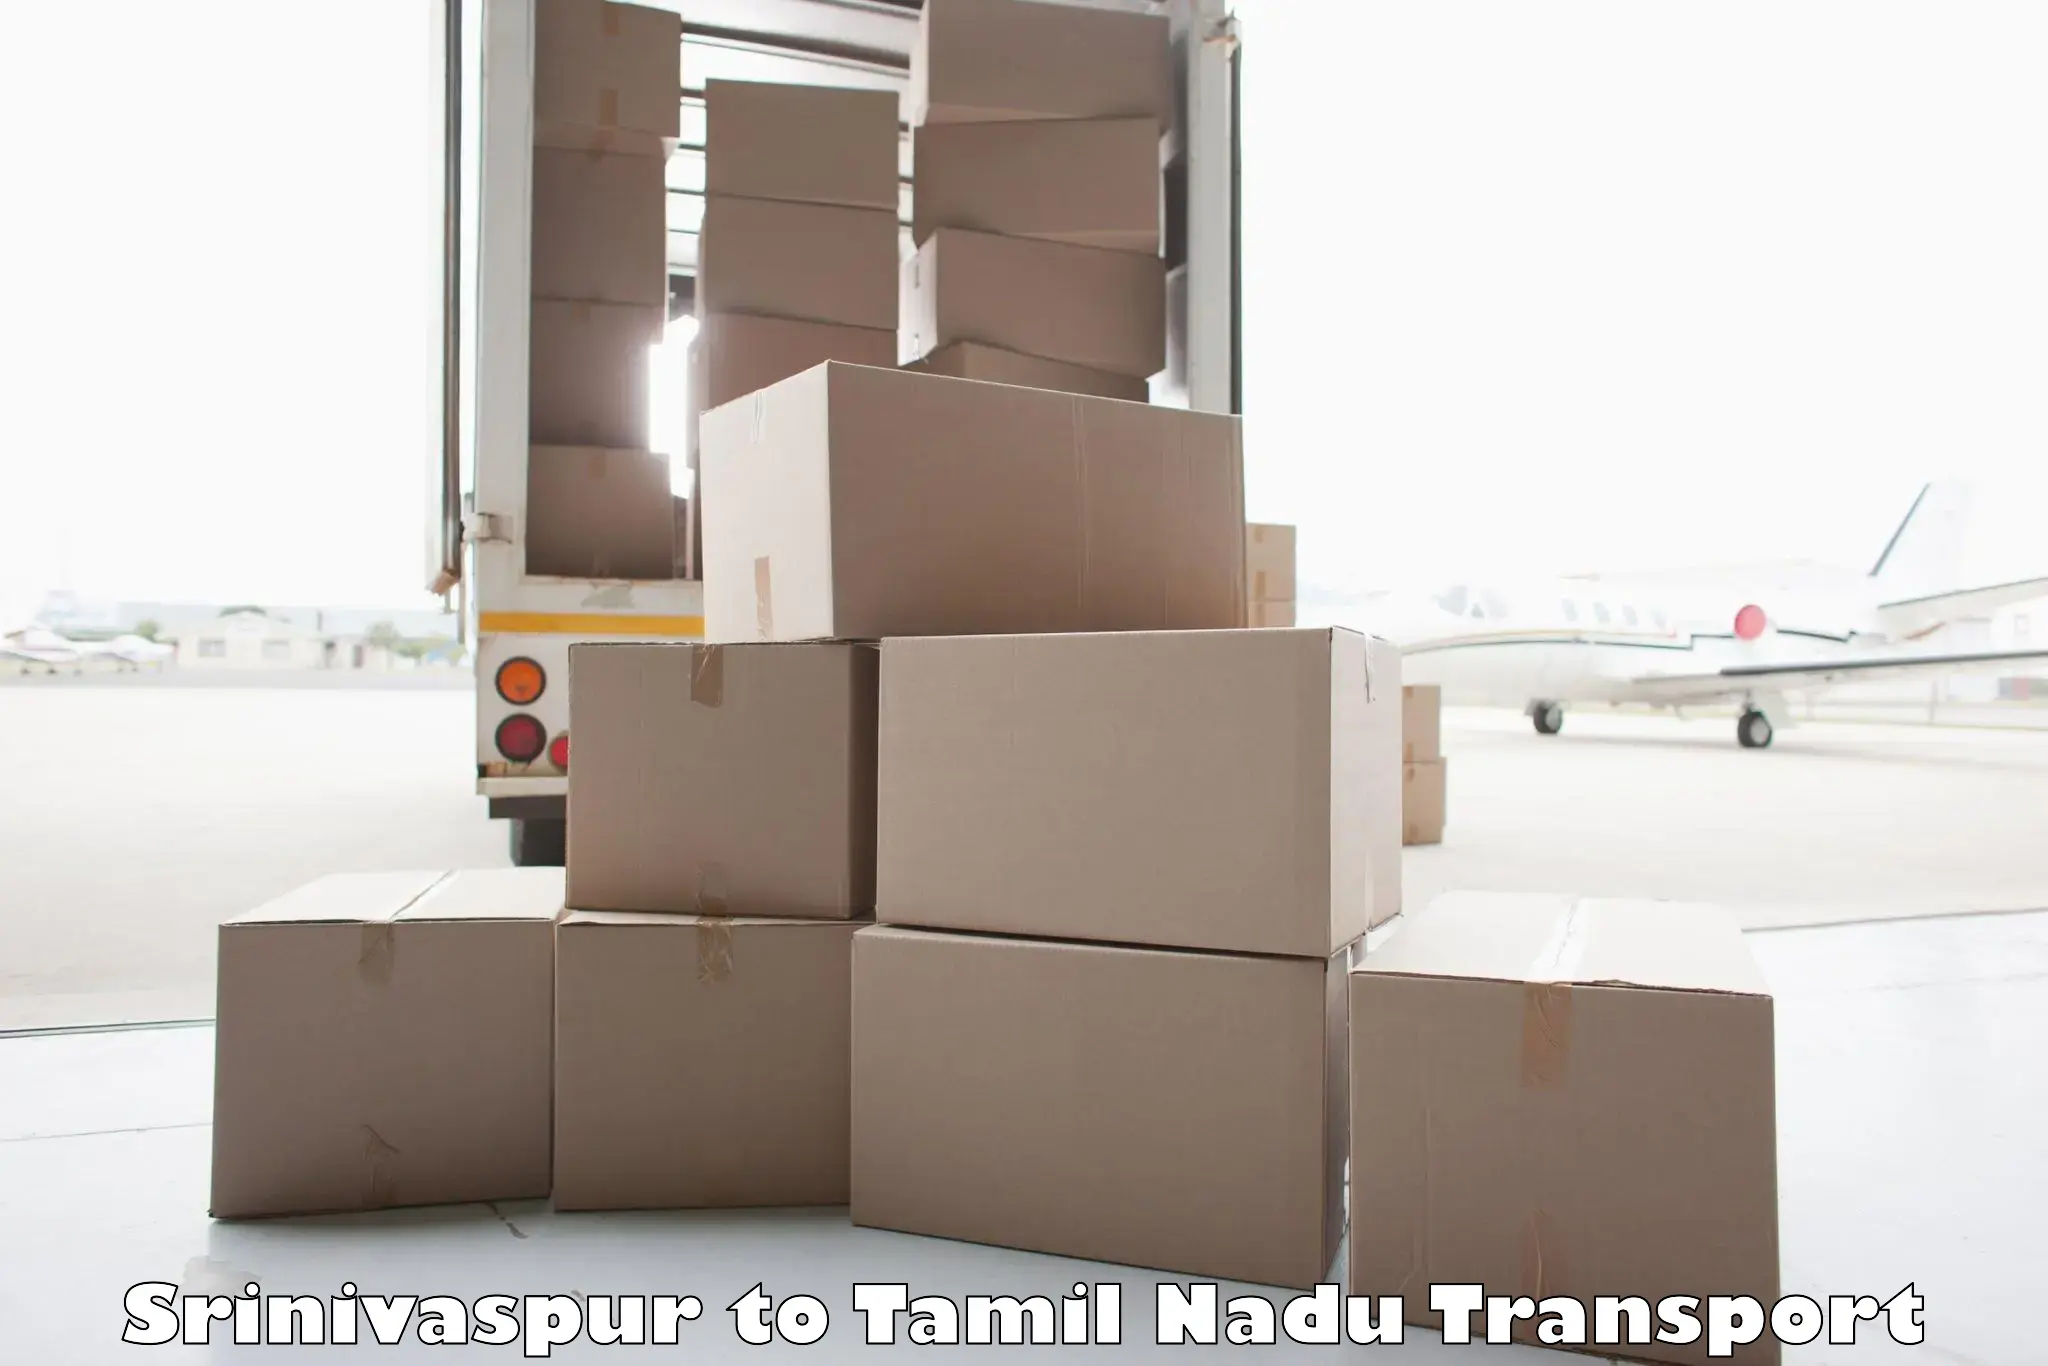 Transport bike from one state to another Srinivaspur to Tamil Nadu